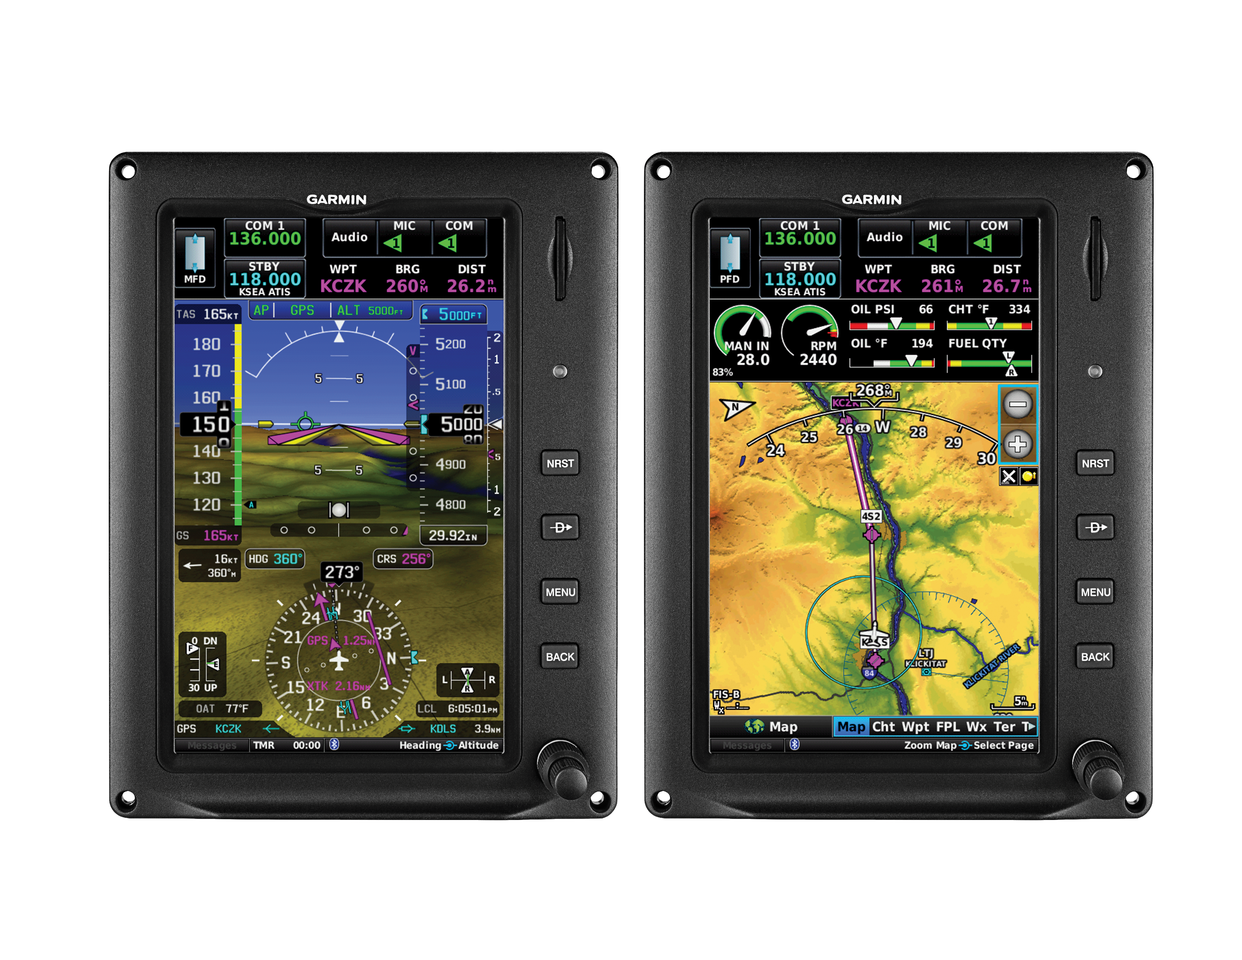 A portrait version of the Garmin G3 Touch seven-inch display will be available later in 2017 for Experimental and Light Sport aircraft.